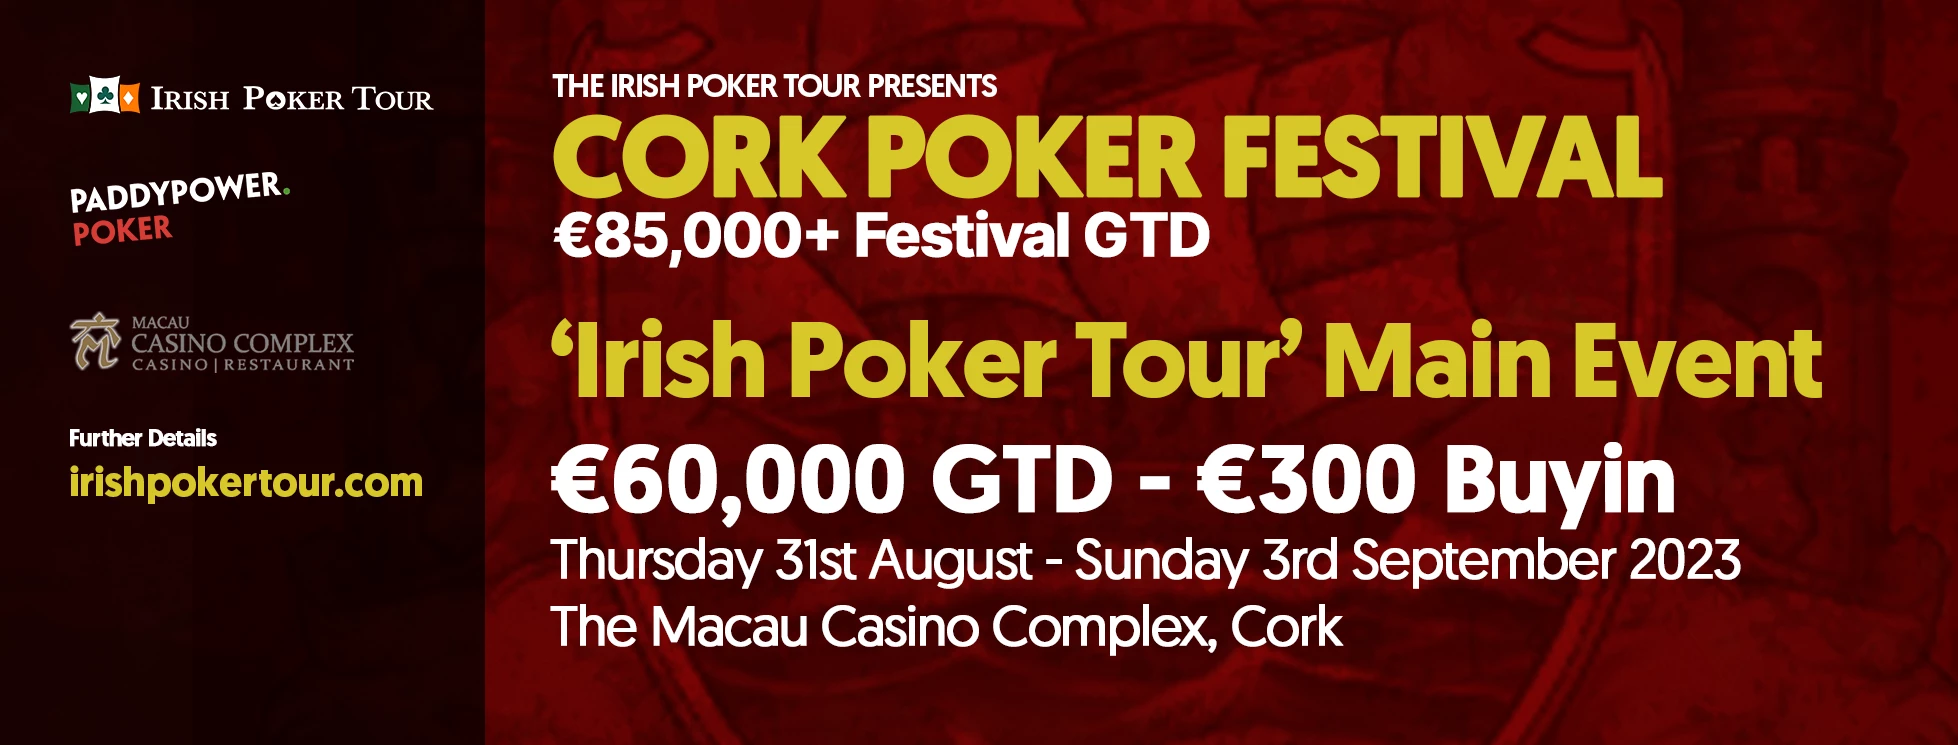 The Cork Poker Festival Sets the Stage for an Exciting Showdown